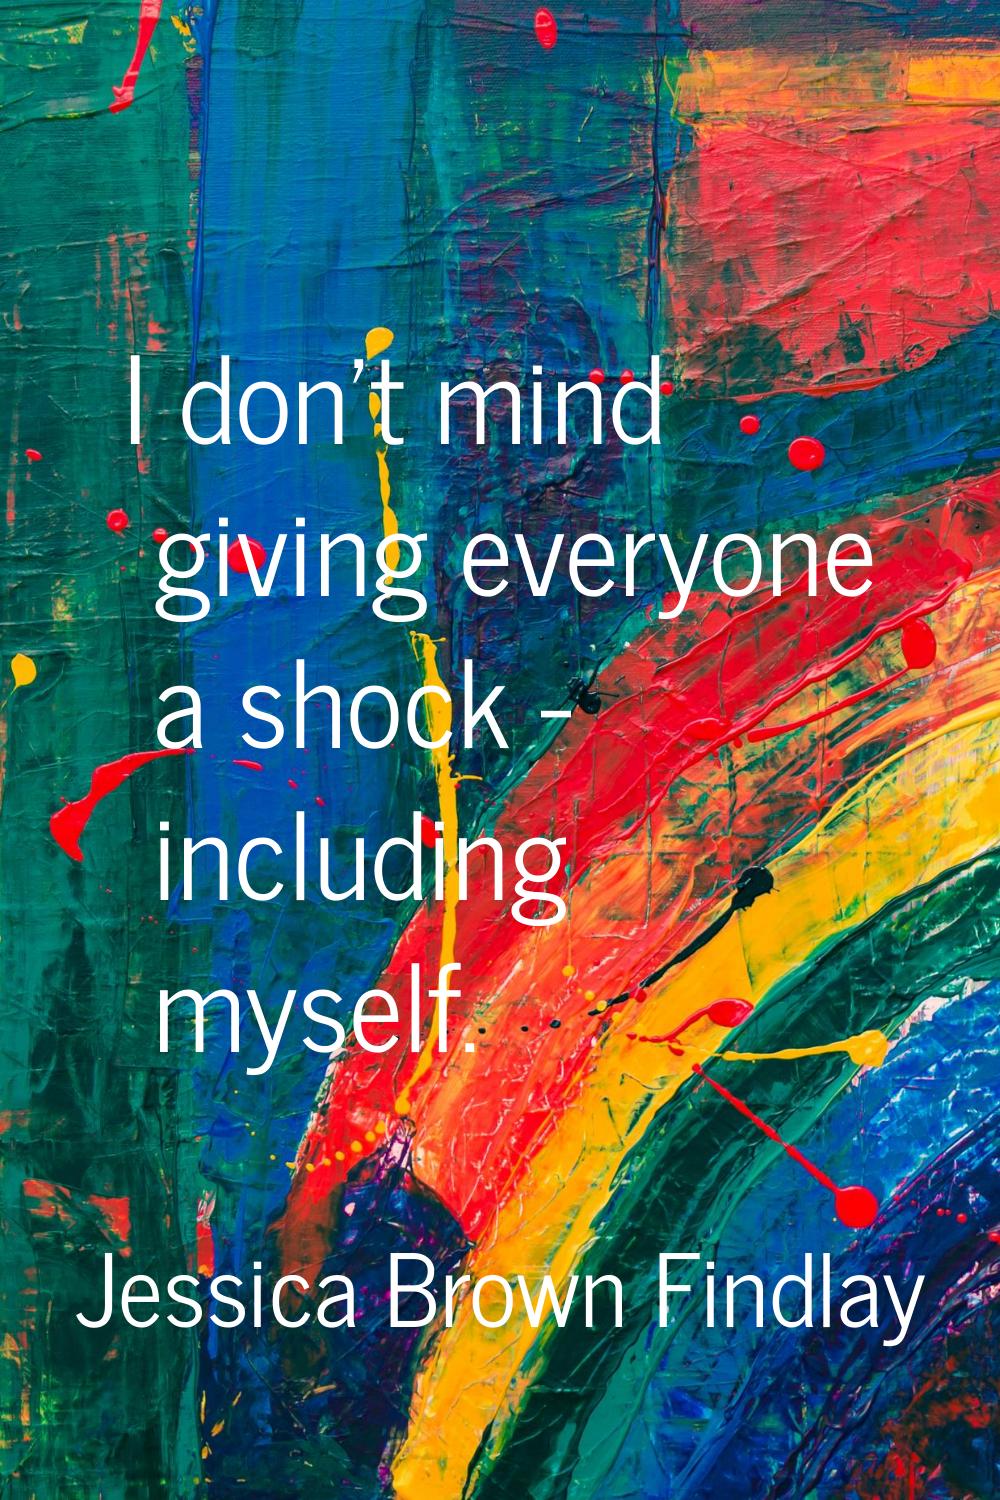 I don't mind giving everyone a shock - including myself.